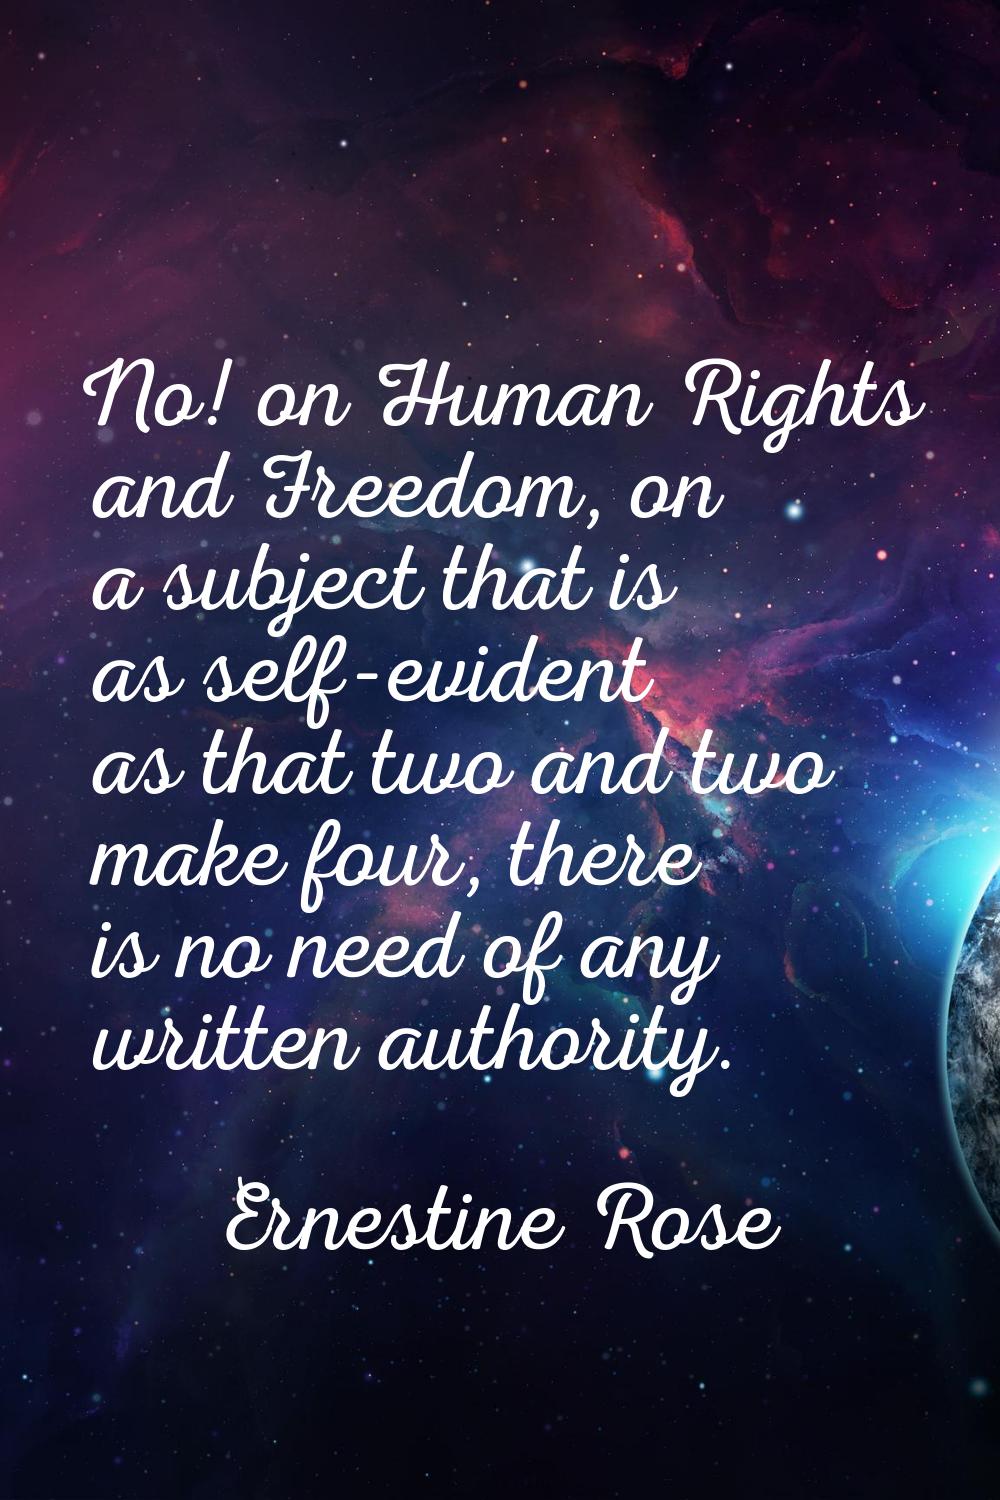 No! on Human Rights and Freedom, on a subject that is as self-evident as that two and two make four